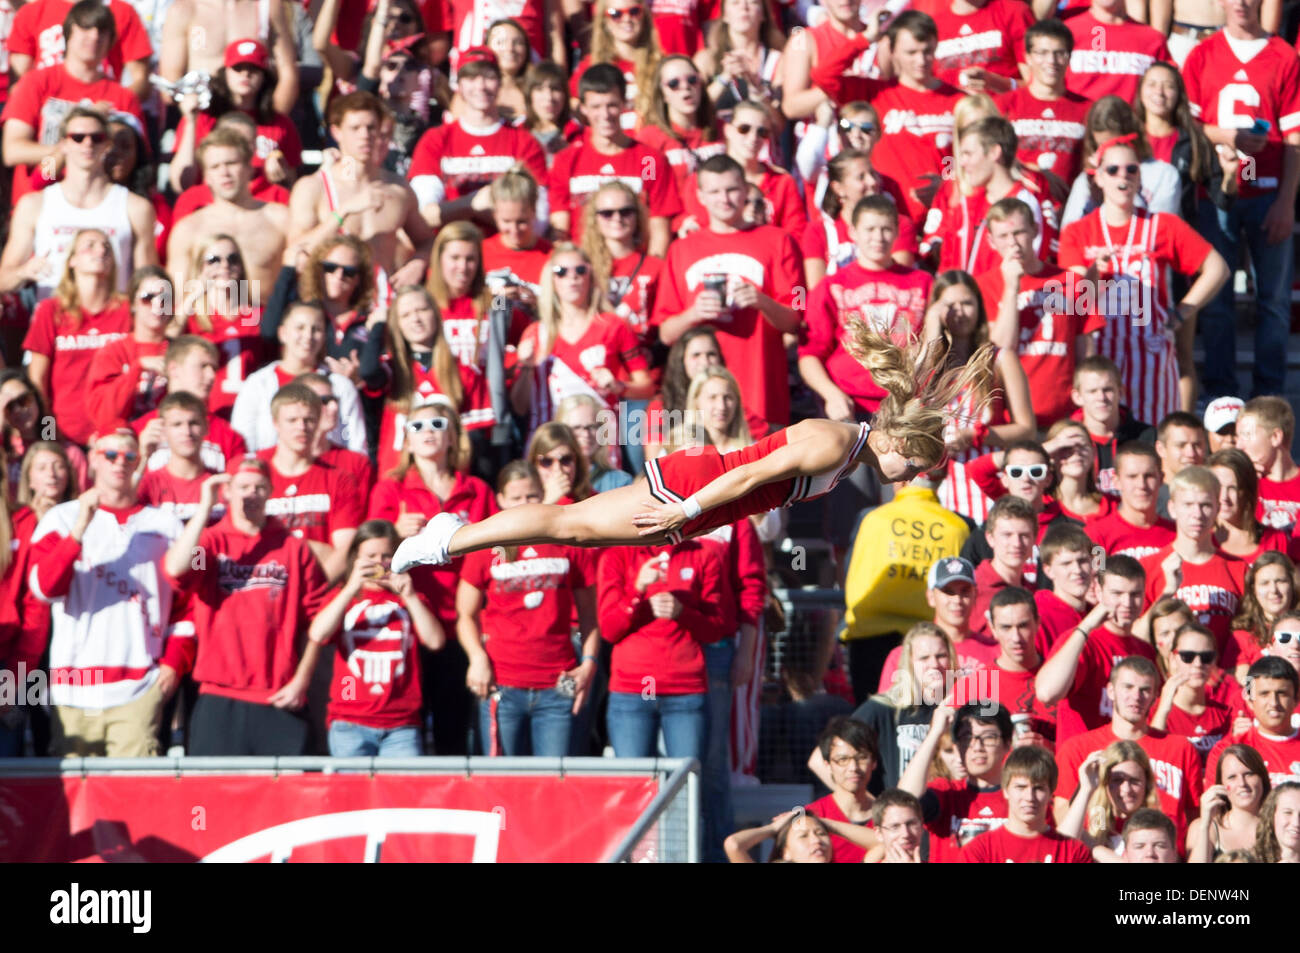 Madison, Wisconsin, USA. 21st Sep, 2013. September 21, 2013: A Wisconsin Badgers cheerleader is flipped into the air after a Wisconsin touchdown during the NCAA Football game between the Purdue Boilermakers and the Wisconsin Badgers at Camp Randall Stadium in Madison, WI. Wisconsin defeated Purdue 41-10 in the Big Ten opener for both teams. John Fisher/CSM/Alamy Live News Stock Photo